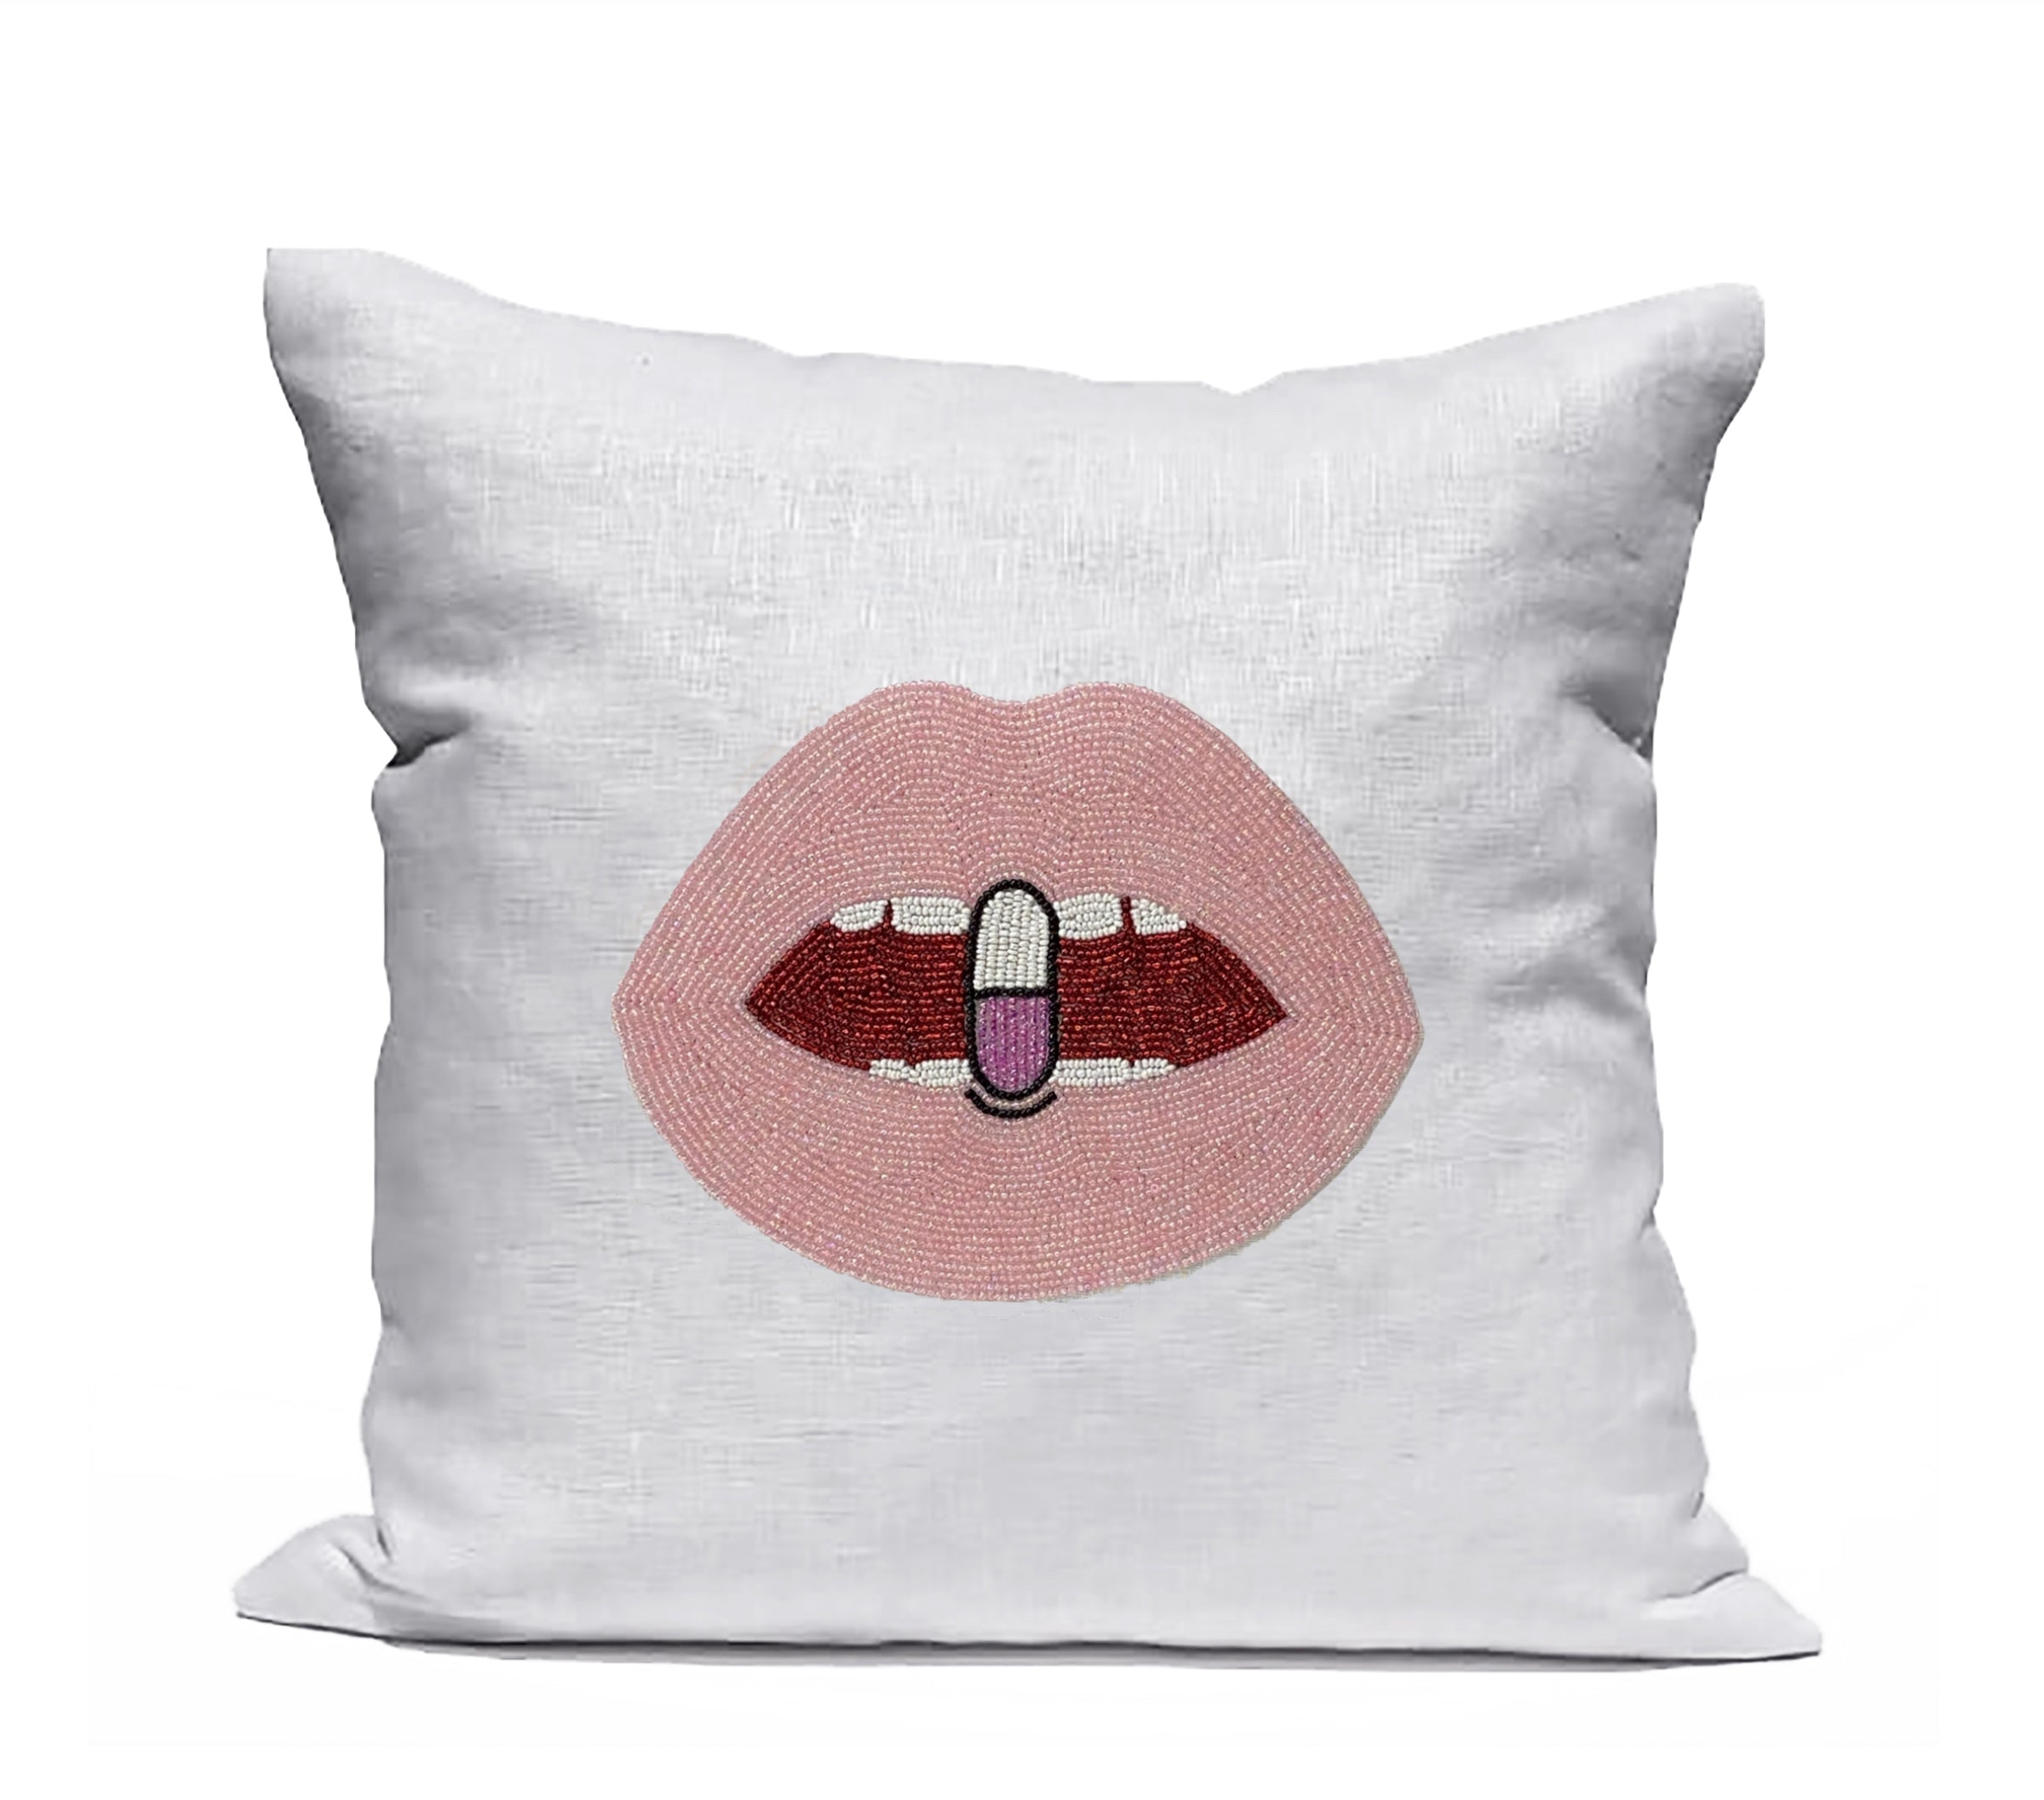 Amore Beaute White Linen With Pink Lips Chill Pill Pillow Cover, dorm pillow cover